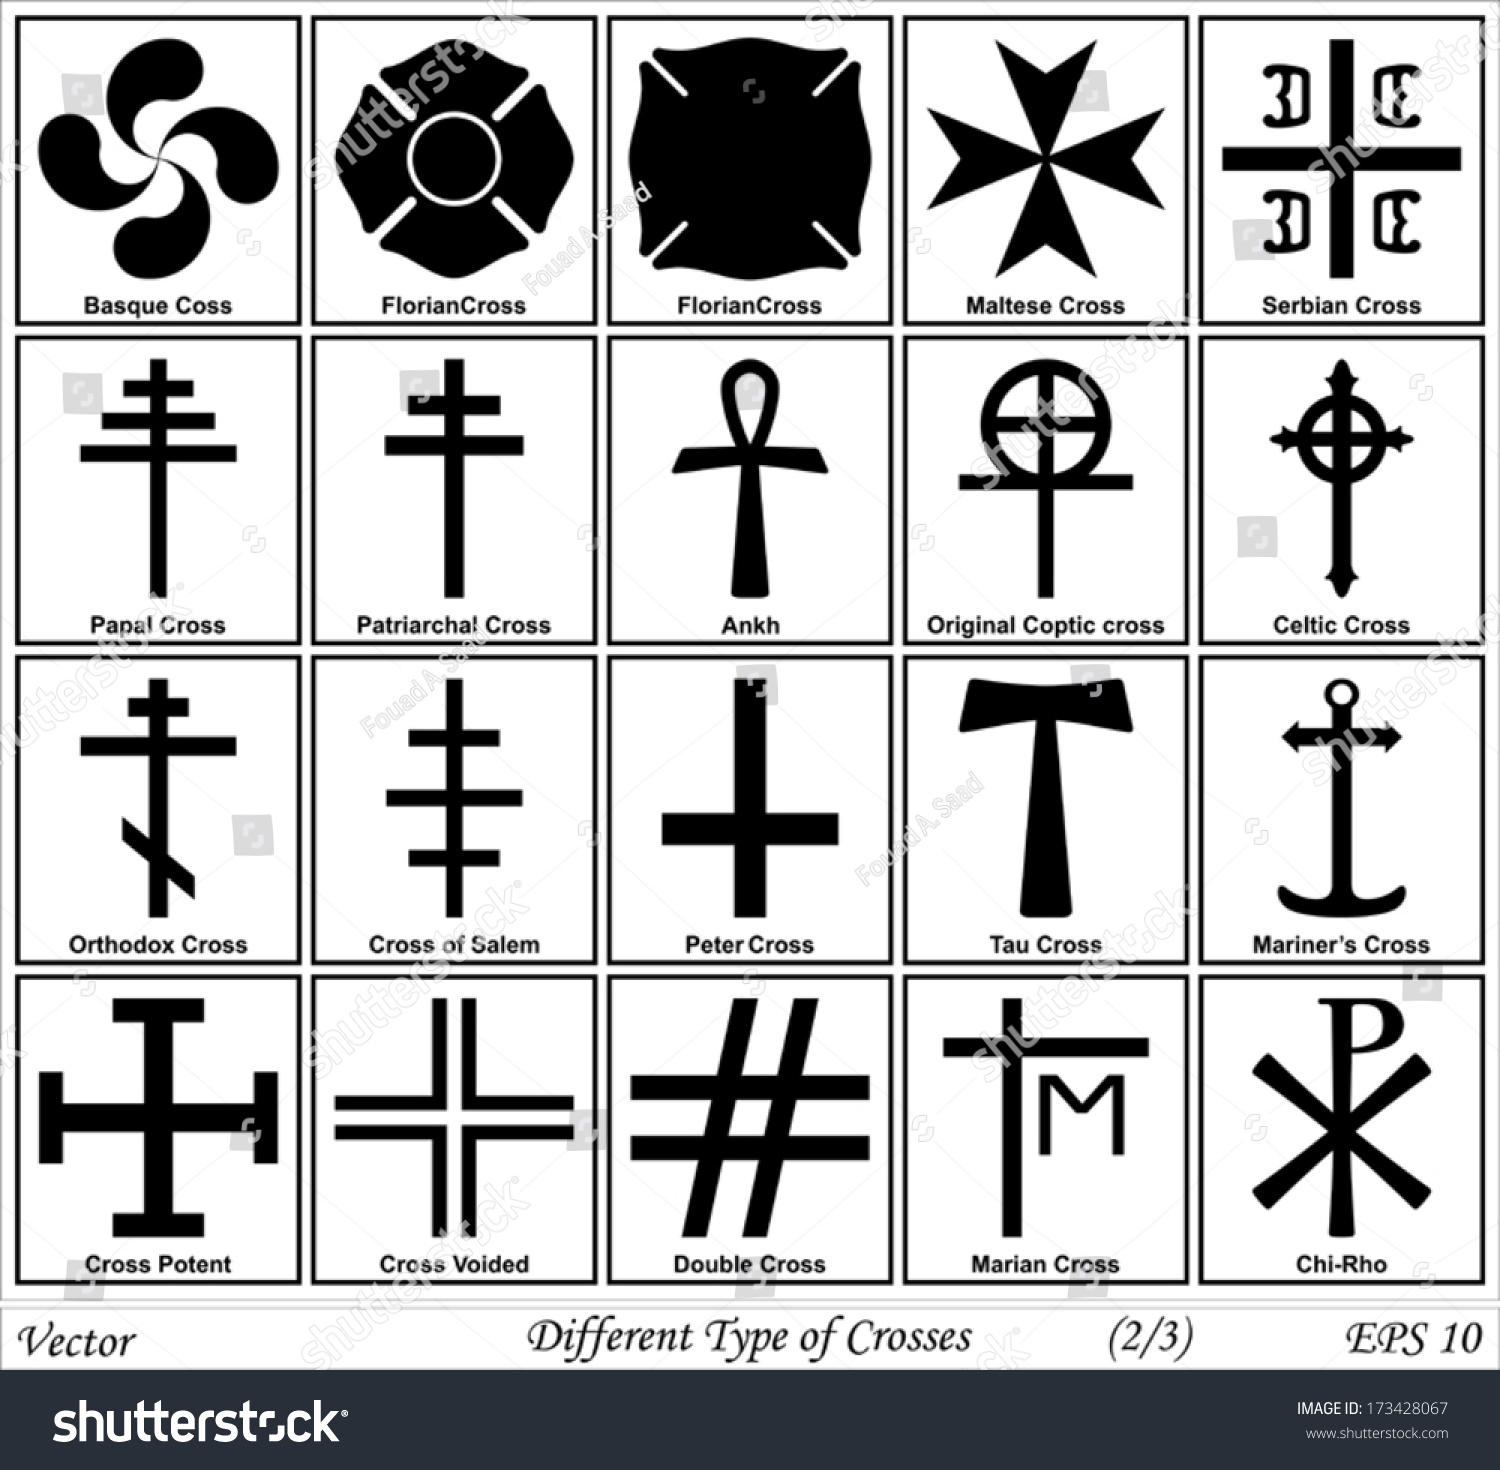 Different Types Of Crosses And Their Meanings Stock Vector Illustration